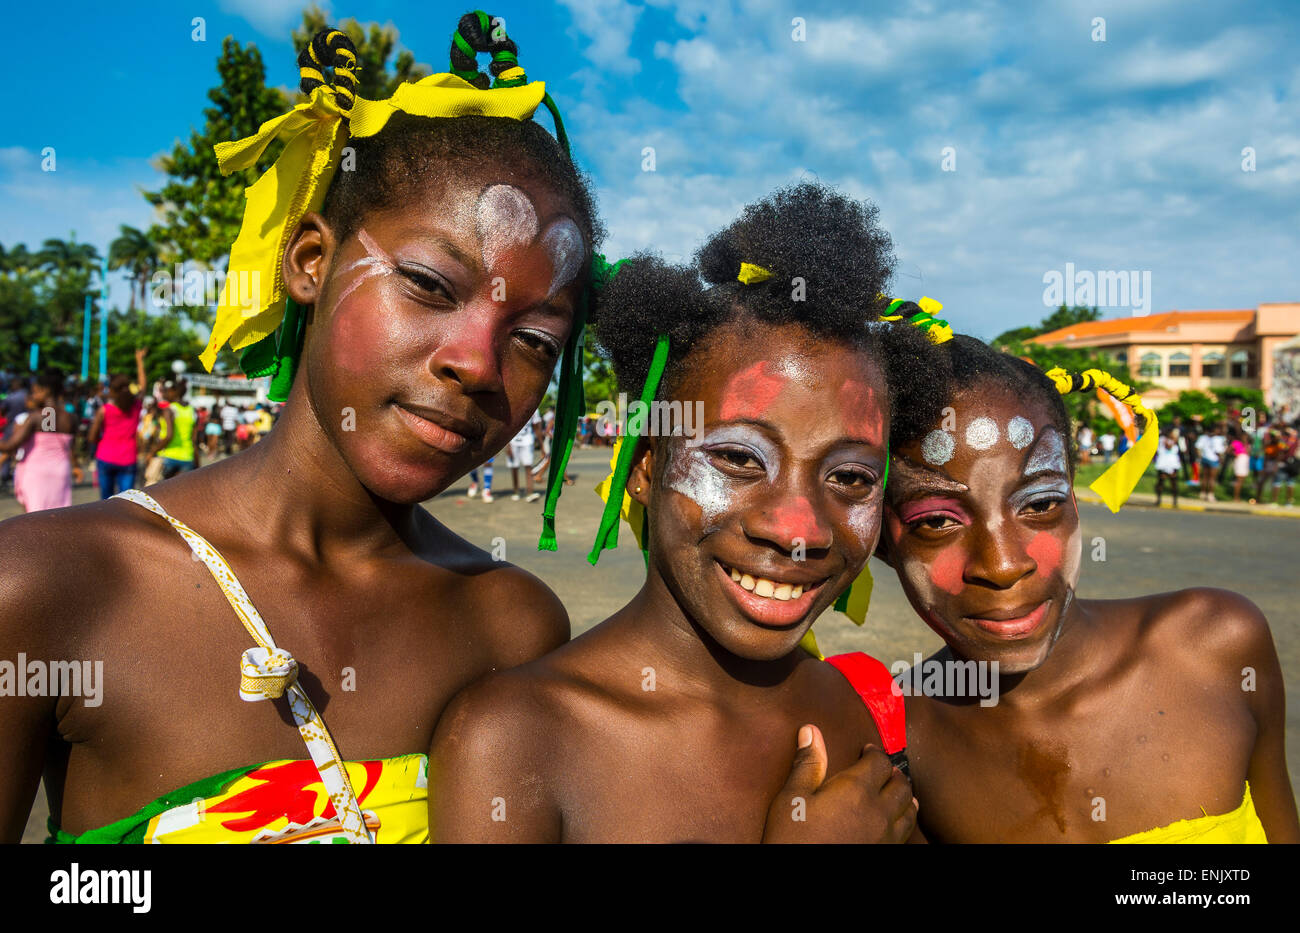 Friendly girls at the Carneval in the town of Sao Tome, Sao Tome and Principe, Atlantic Ocean, Africa Stock Photo